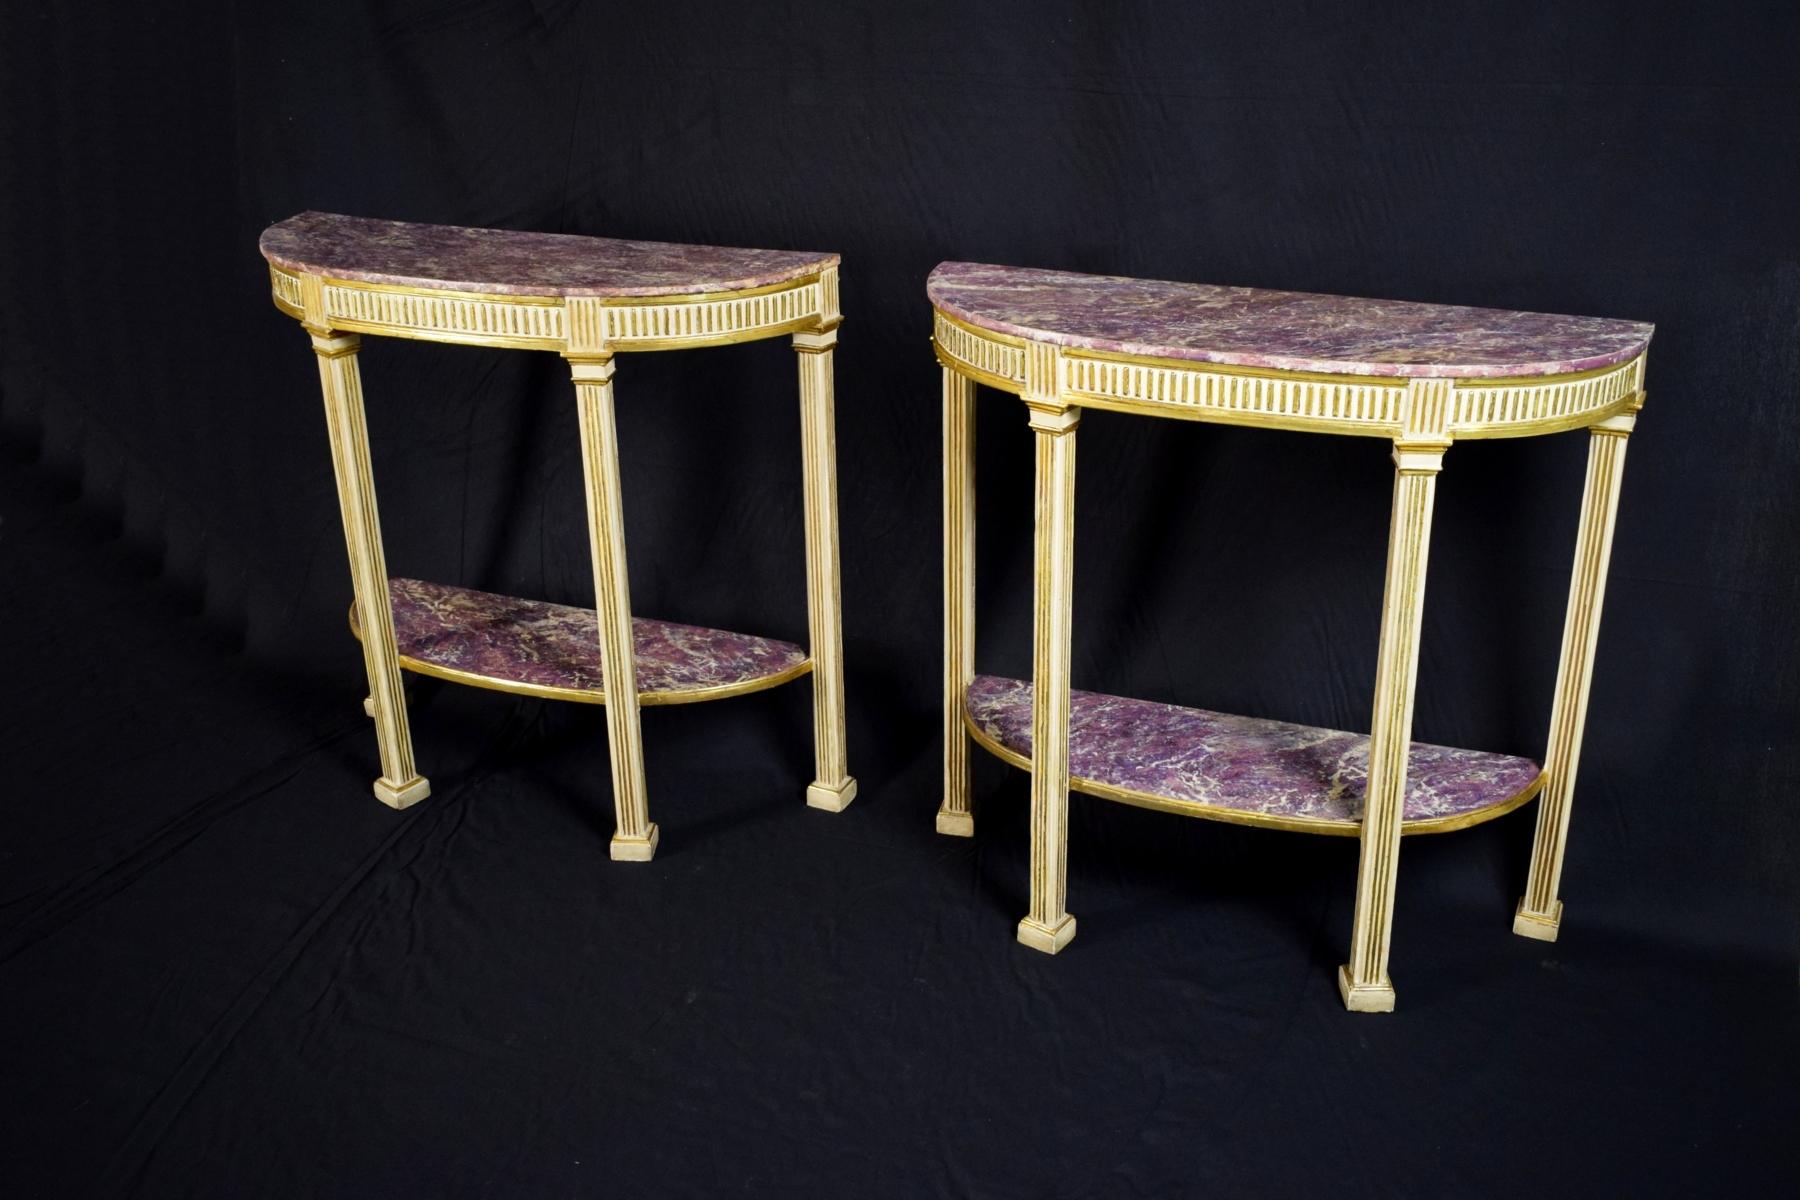 Pair of half-moon Italian consoles in lacquered and gilded wood, finely carved, false amethyst lacquered wooden shelves.